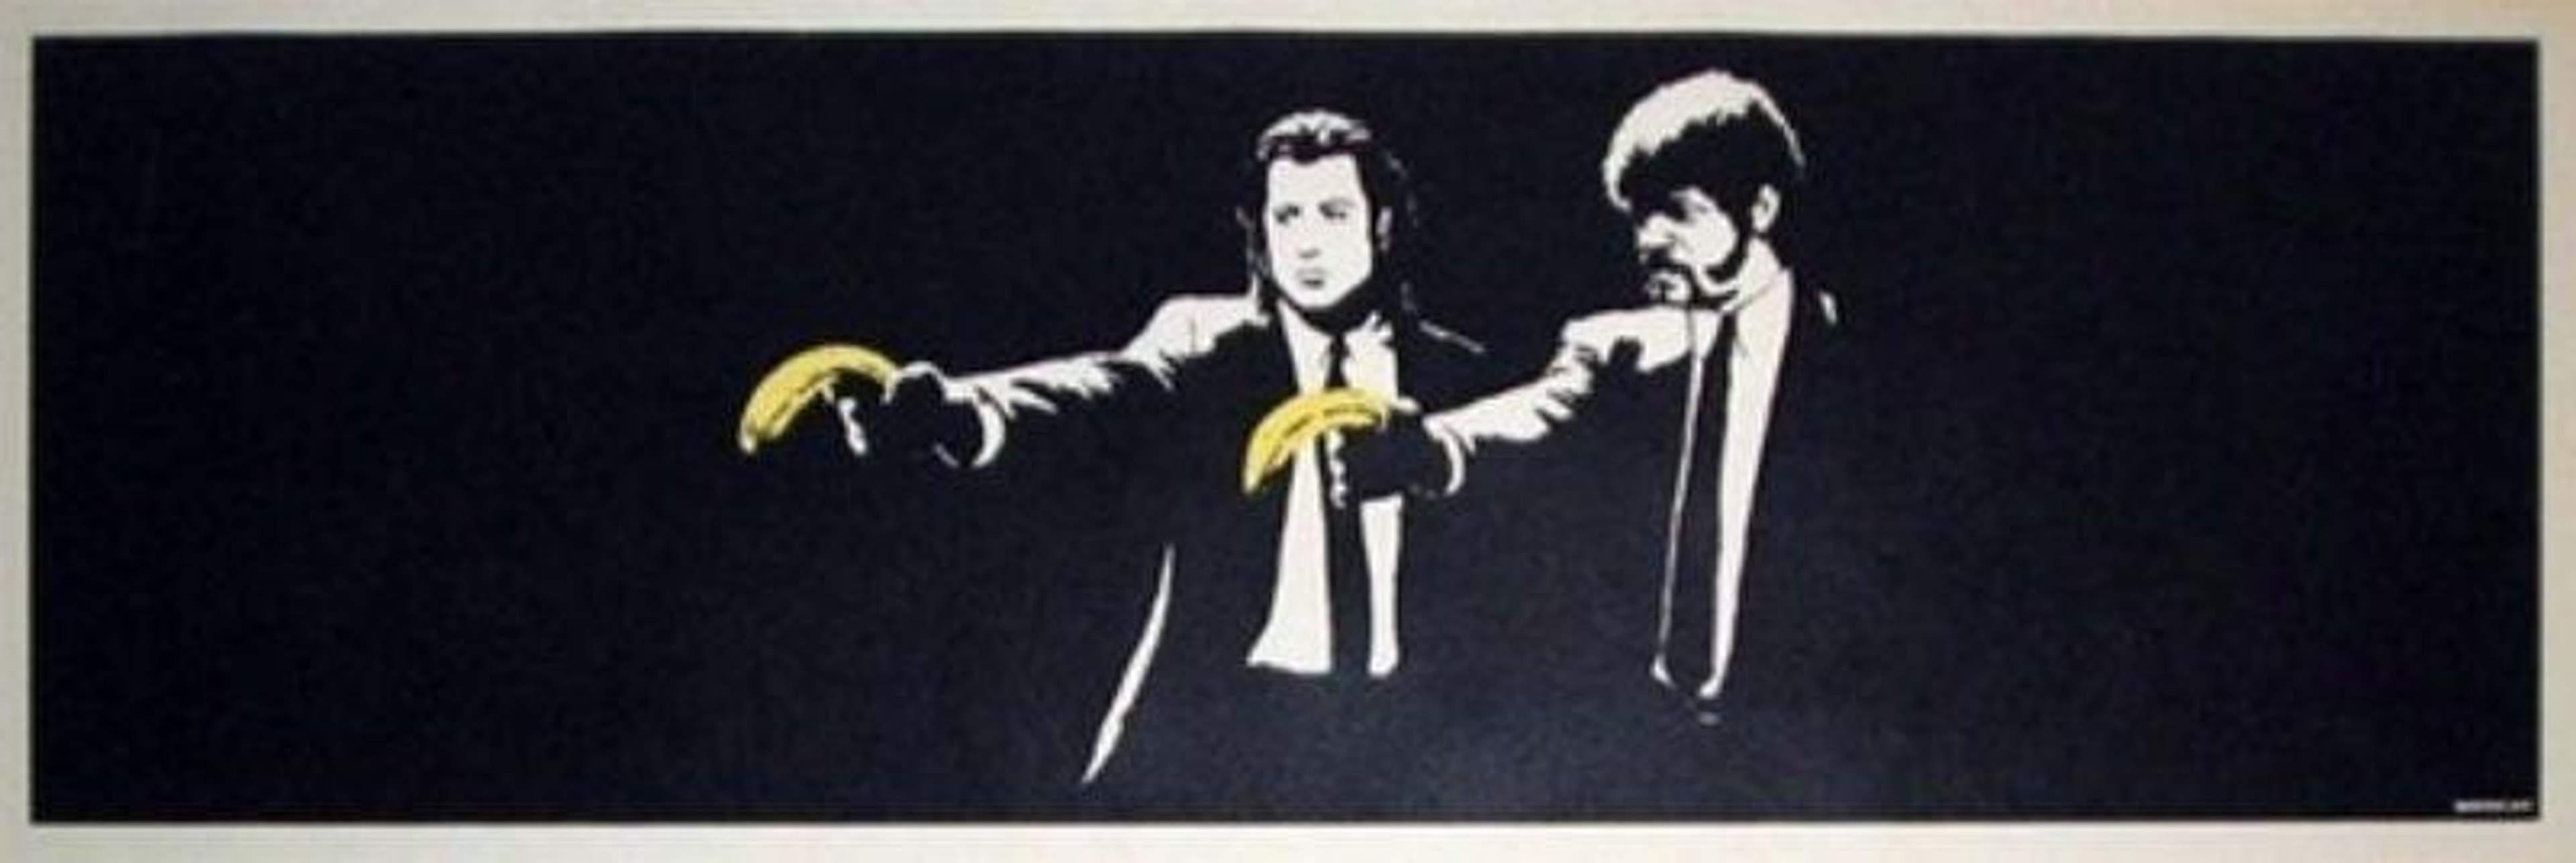 Pulp Fiction (AP, stretched version) - Signed Print